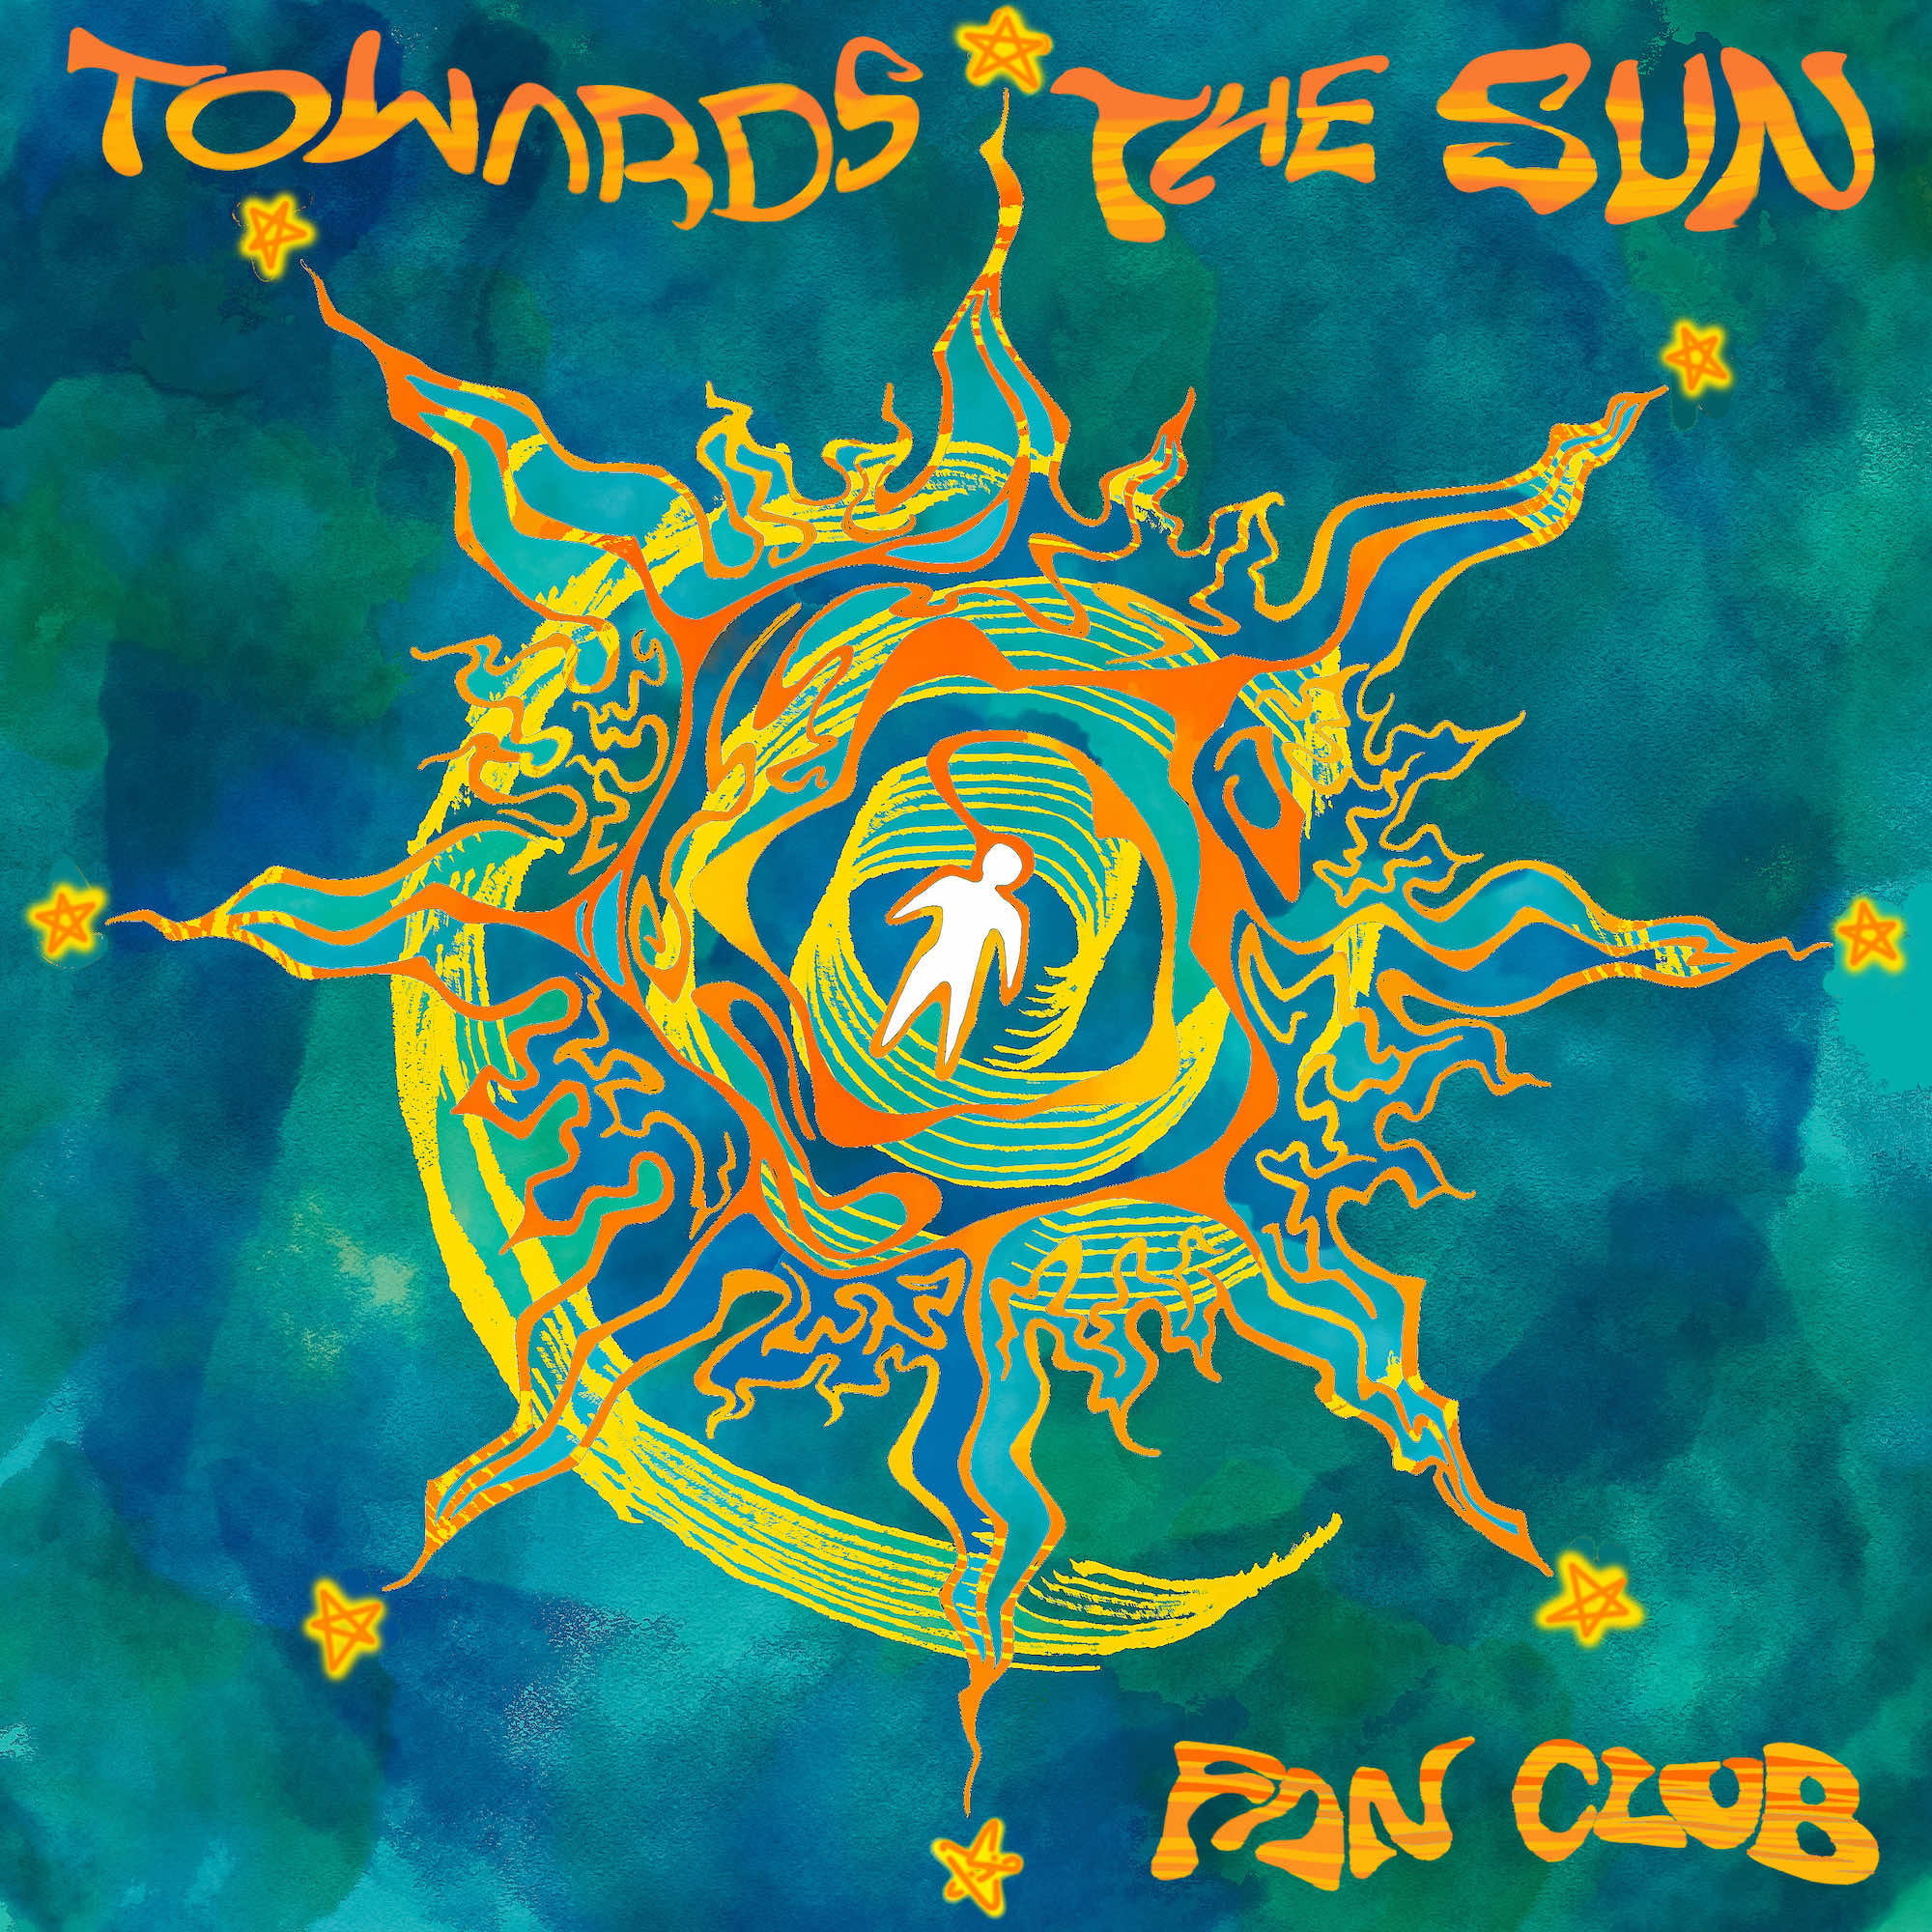 New Zealand indie-rock band Fan Club release their highly-anticipated debut EP, "Towards the Sun". The collection of songs, produced by Andrew Isdale, is made possible by SmokeFree RockQuest, NZ on Air, and proceeds from their exciting live shows.